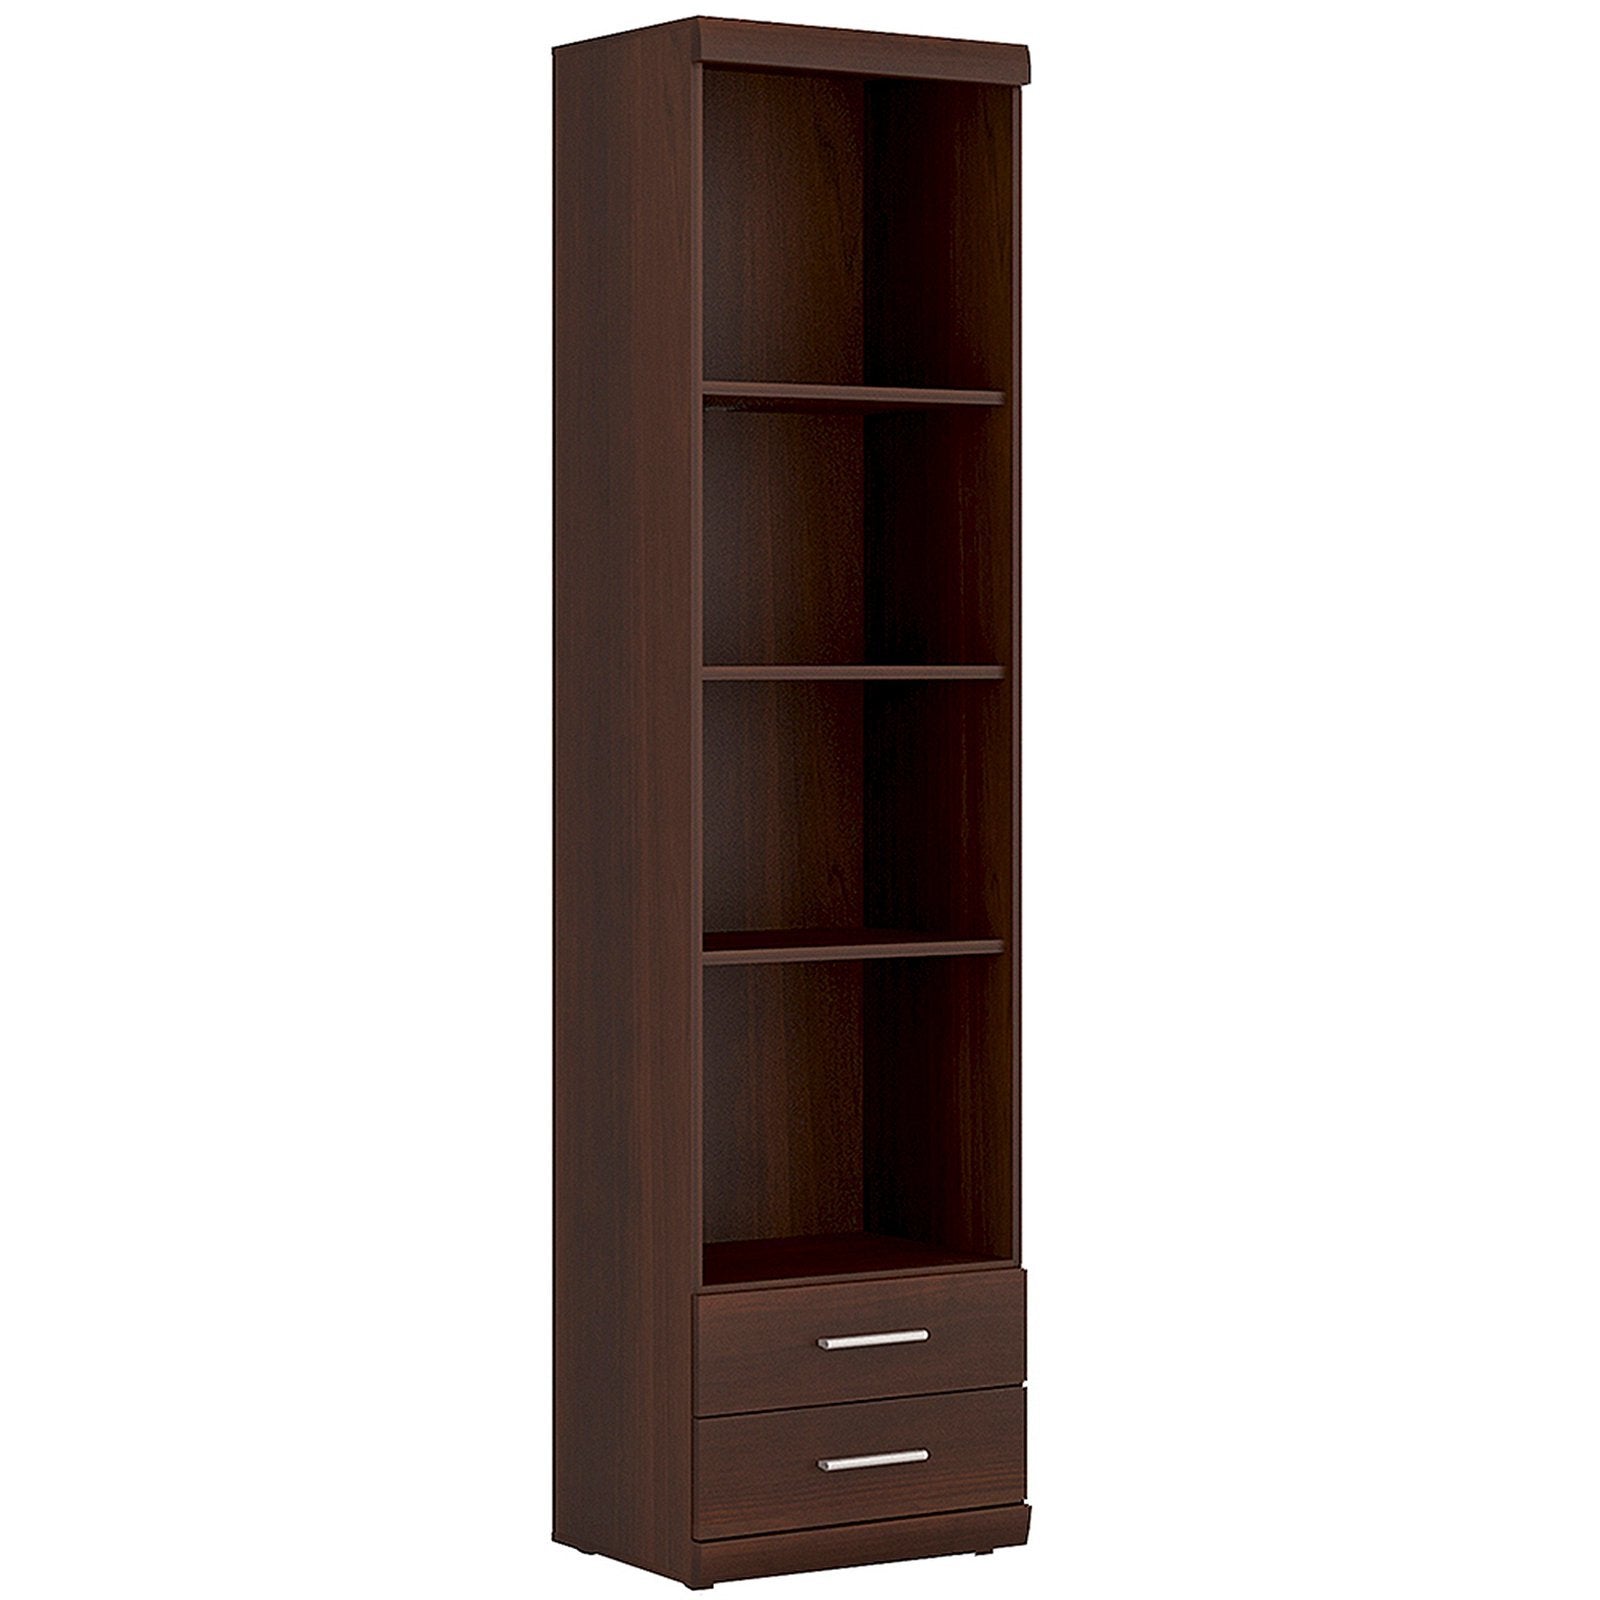 Imperial Tall 2 Drawer Narrow Cabinet with Open Shelving in Dark Mahogany Melamine